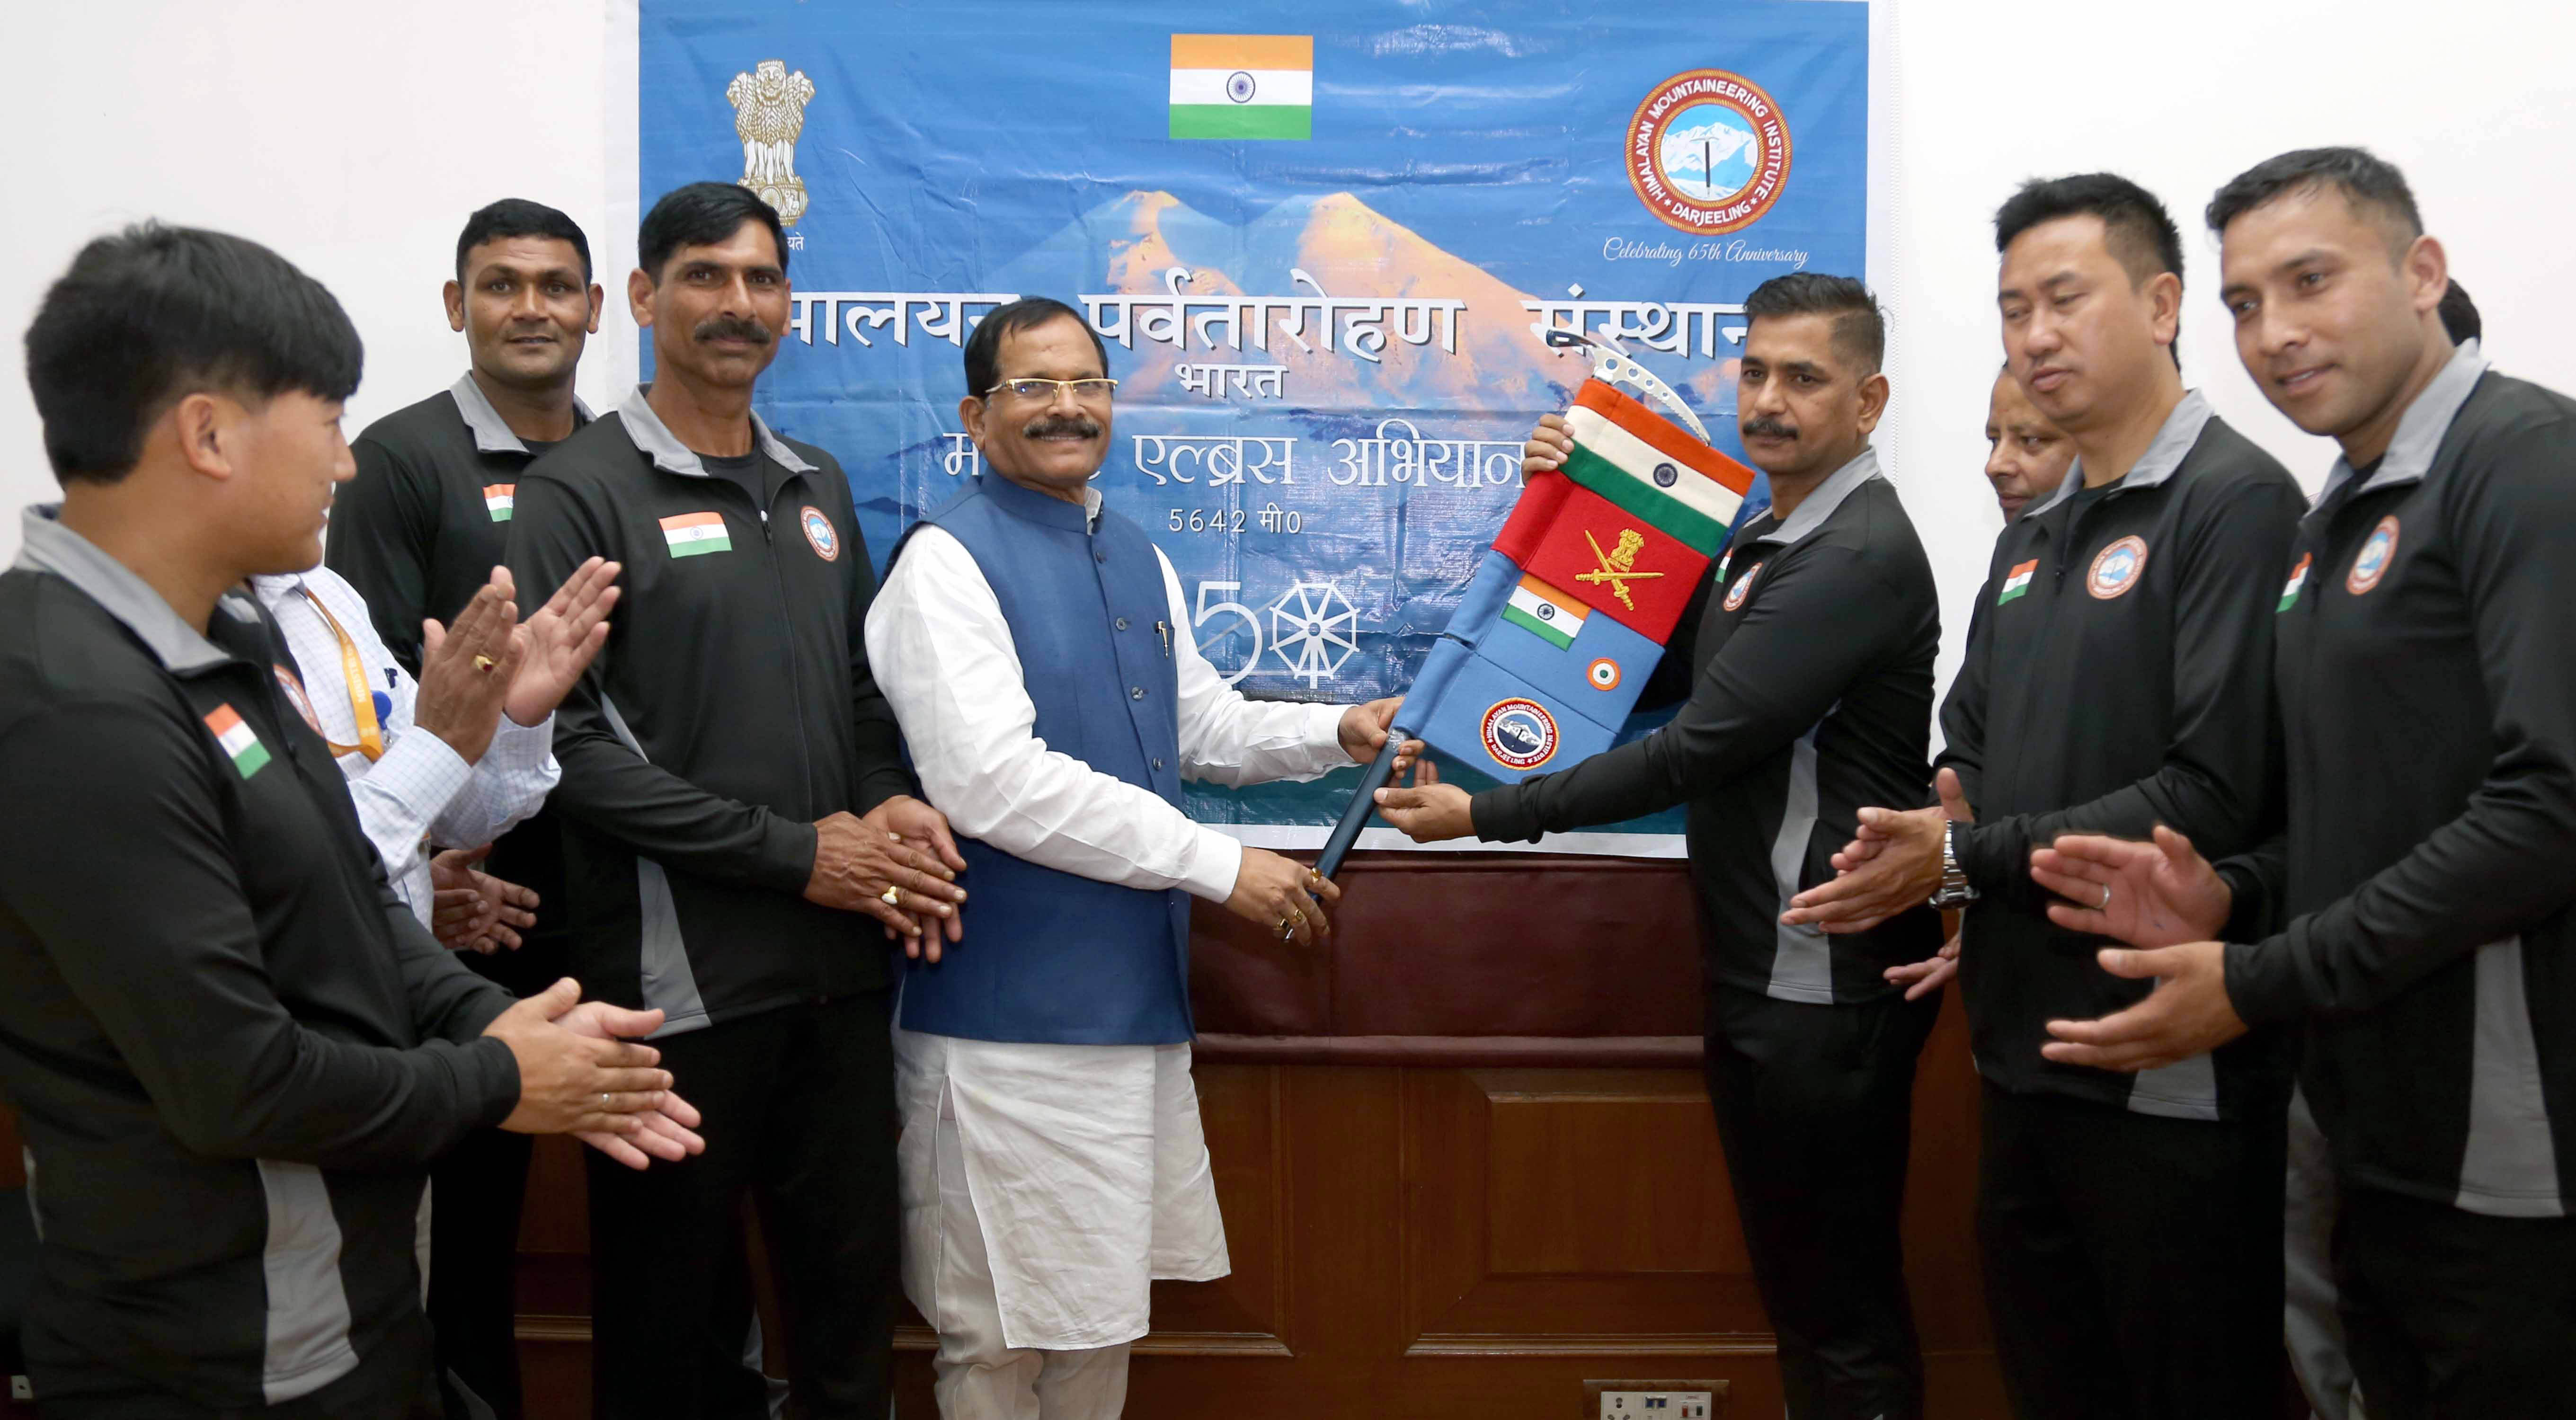 The Minister of State for AYUSH (Independent Charge) and Defence, Shripad Yesso Naik interacting with a team of Himalayan Mountaineering Institute, Darjeeling, the team will undertake expedition to Mt. Elbrus (5,642 m) in Russia, in New Delhi